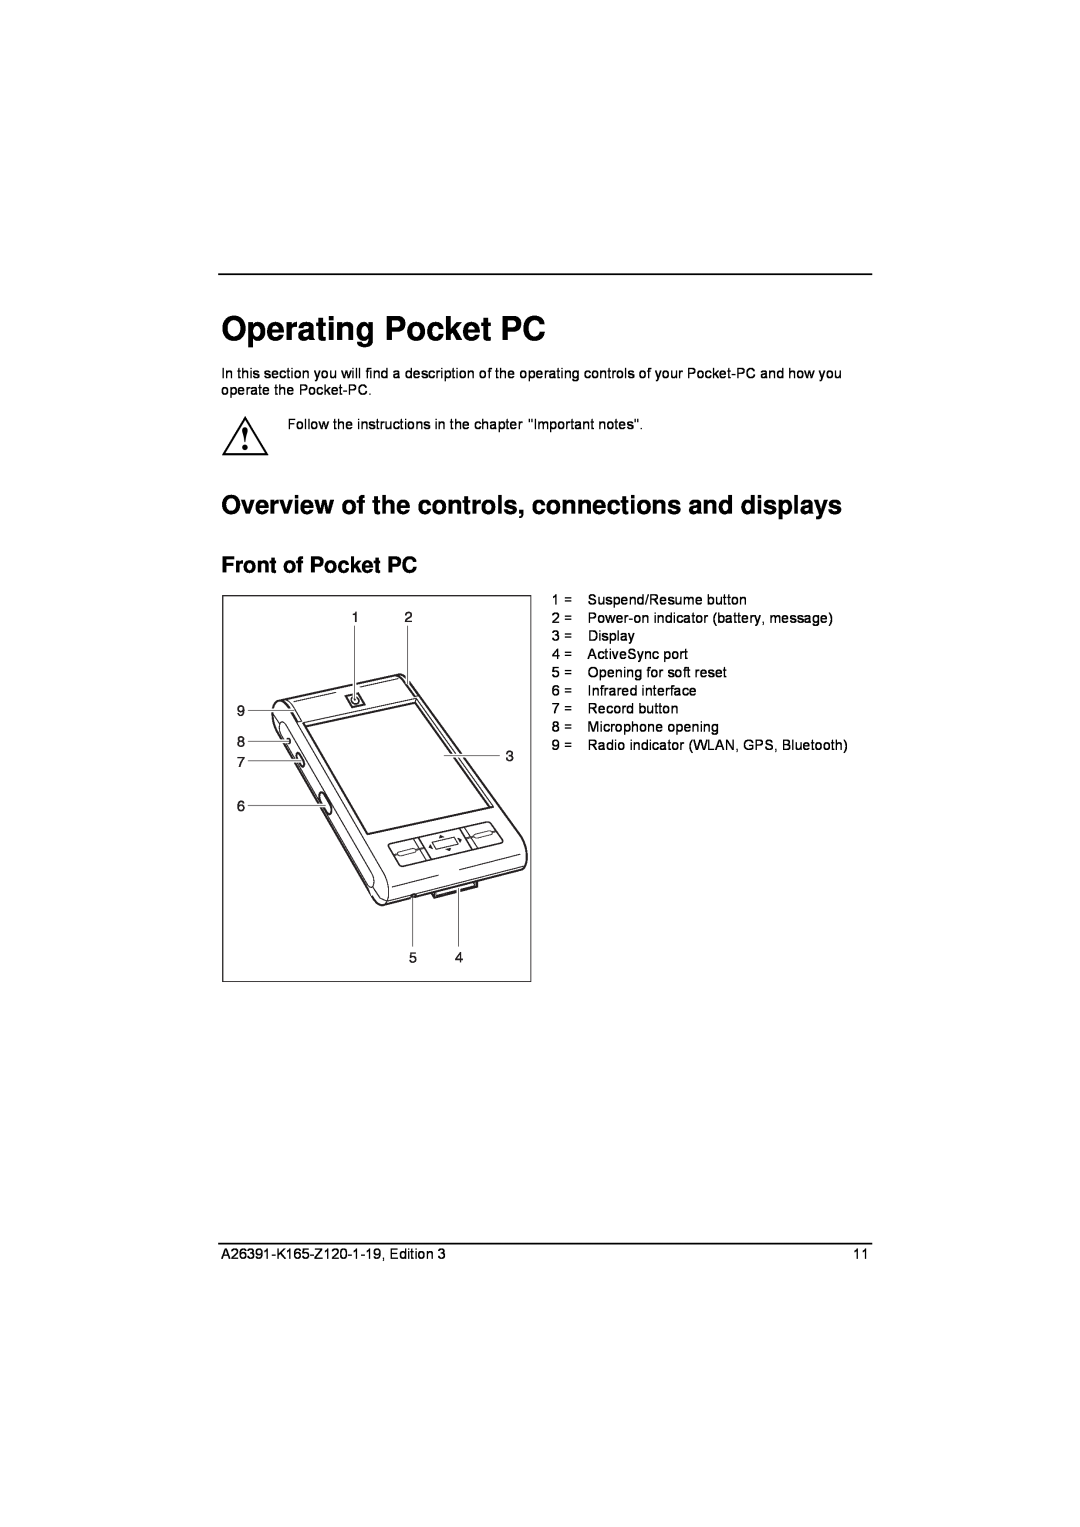 Zweita  Co N/C Series manual Operating Pocket PC, Overview of the controls, connections and displays, Front of Pocket PC 